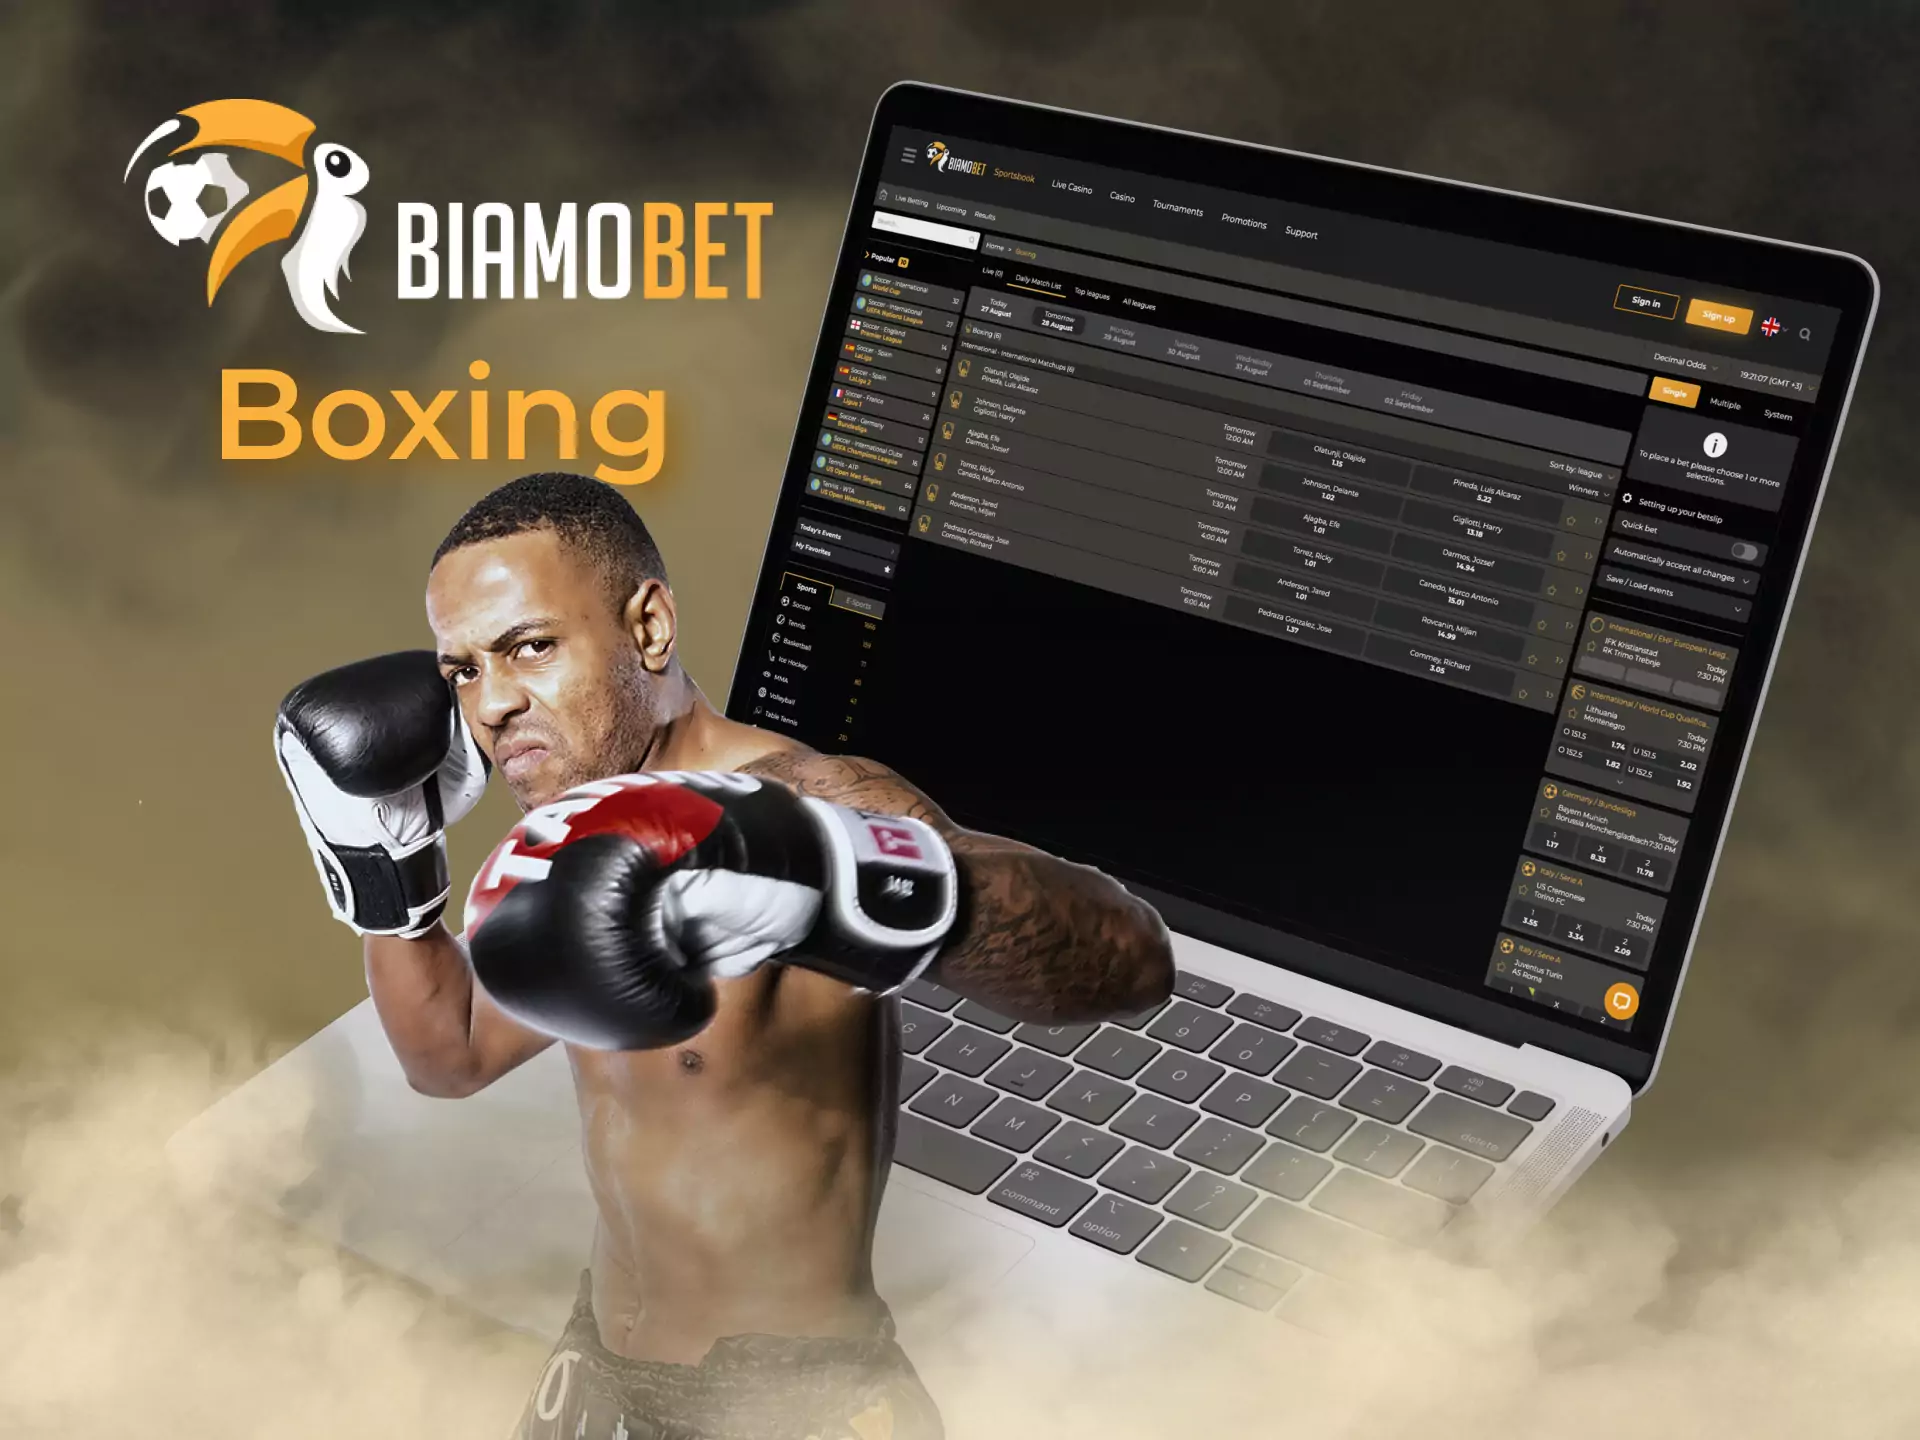 You can place a bet on boxing fights on Biamobet.